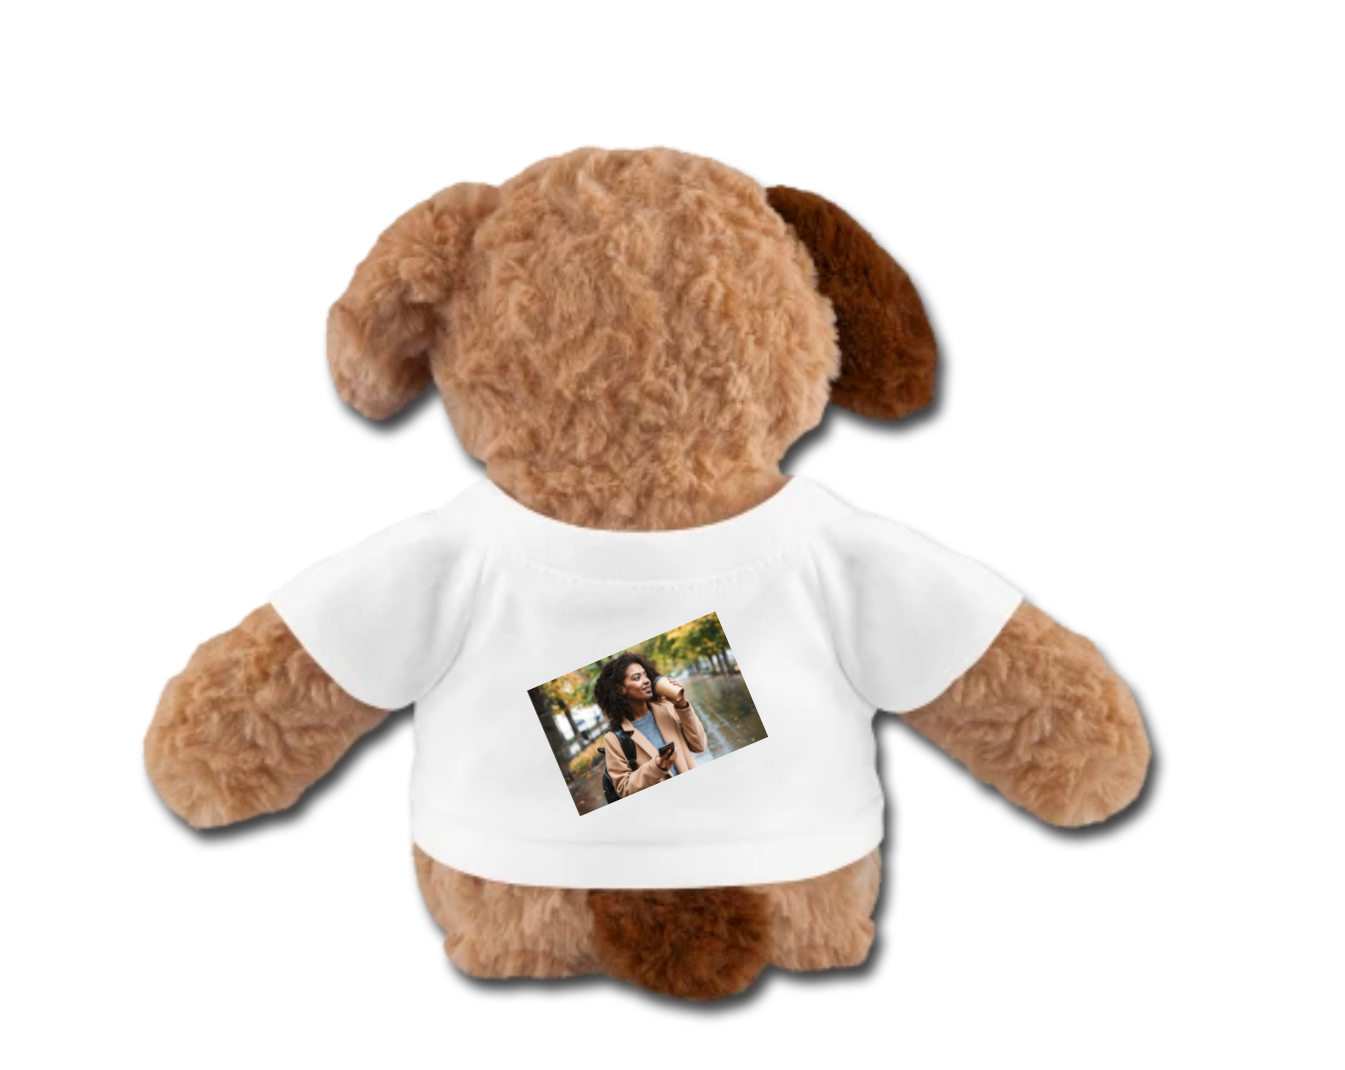 personalized brown teddy dog, custom teddy bear, printed with personal image or text, welcoming baby gift, gift for her, gift for newborn